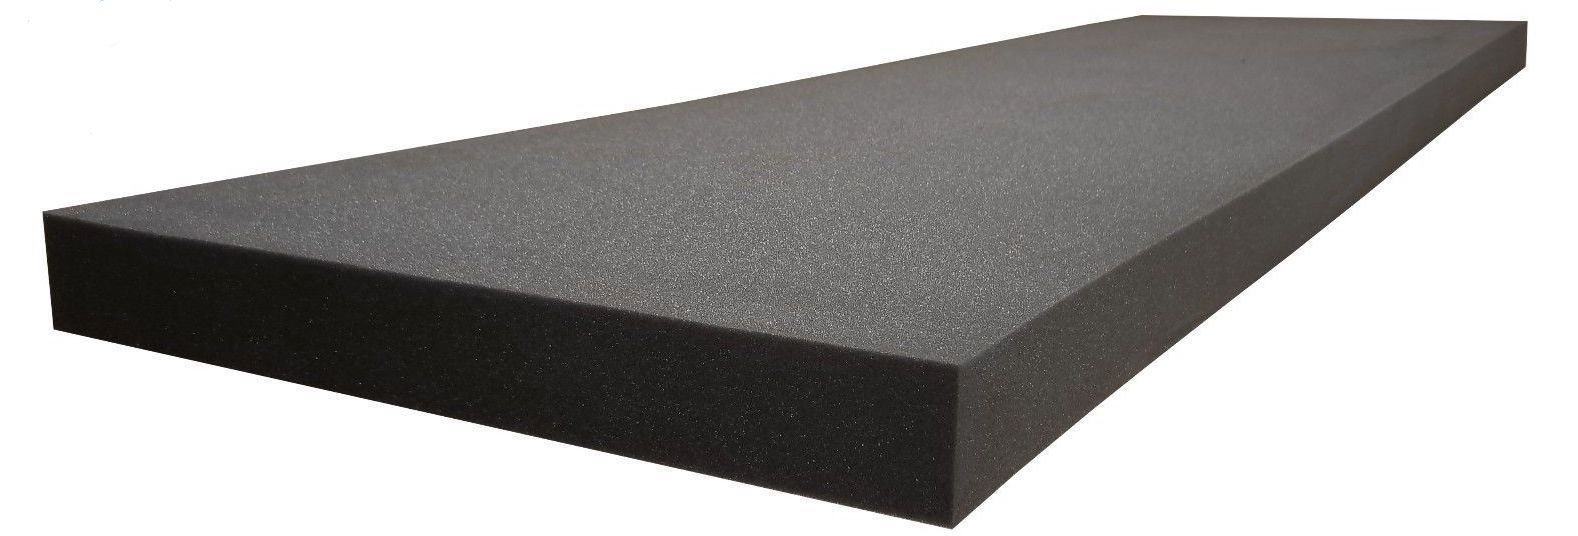 Ak Trading Co Acoustic Foam Flat Panel Studio Soundproofing Foam Sheet Perfect For Use In Recording Studios, Control Rooms, Offi